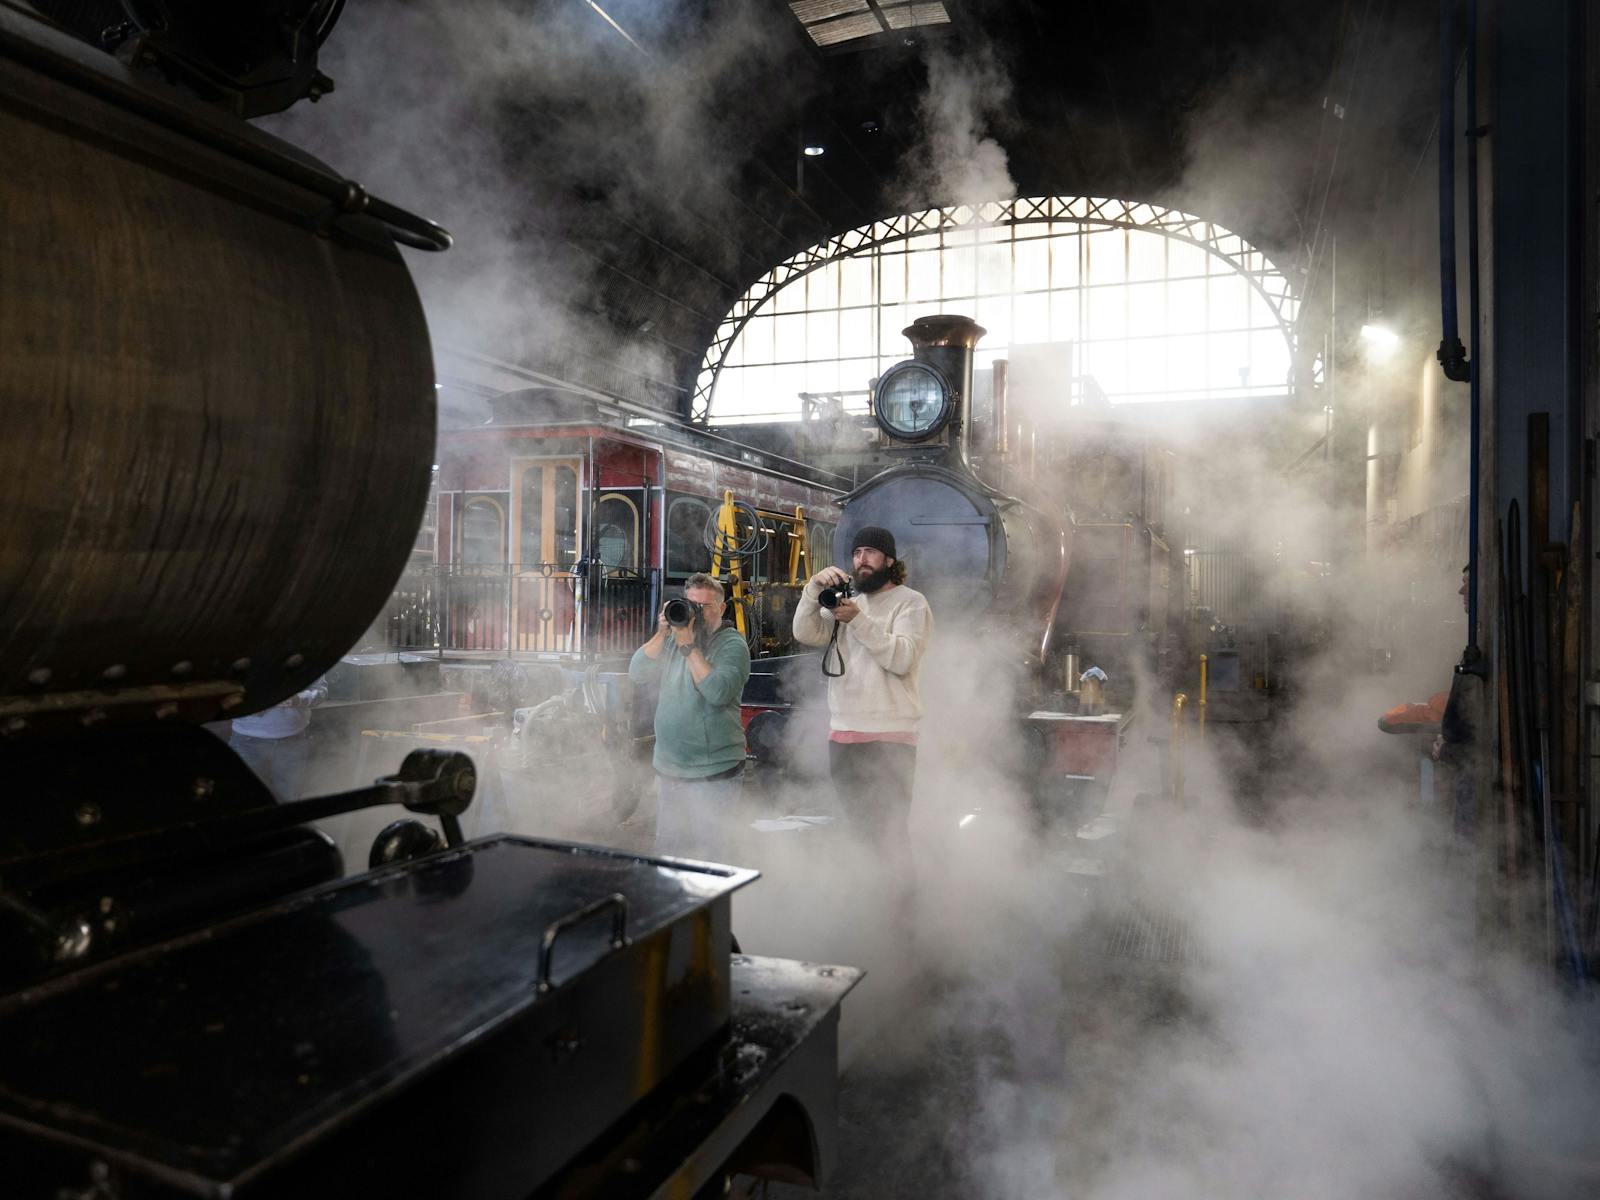 Two photographers face a steaming locomotive with a second loco behind them